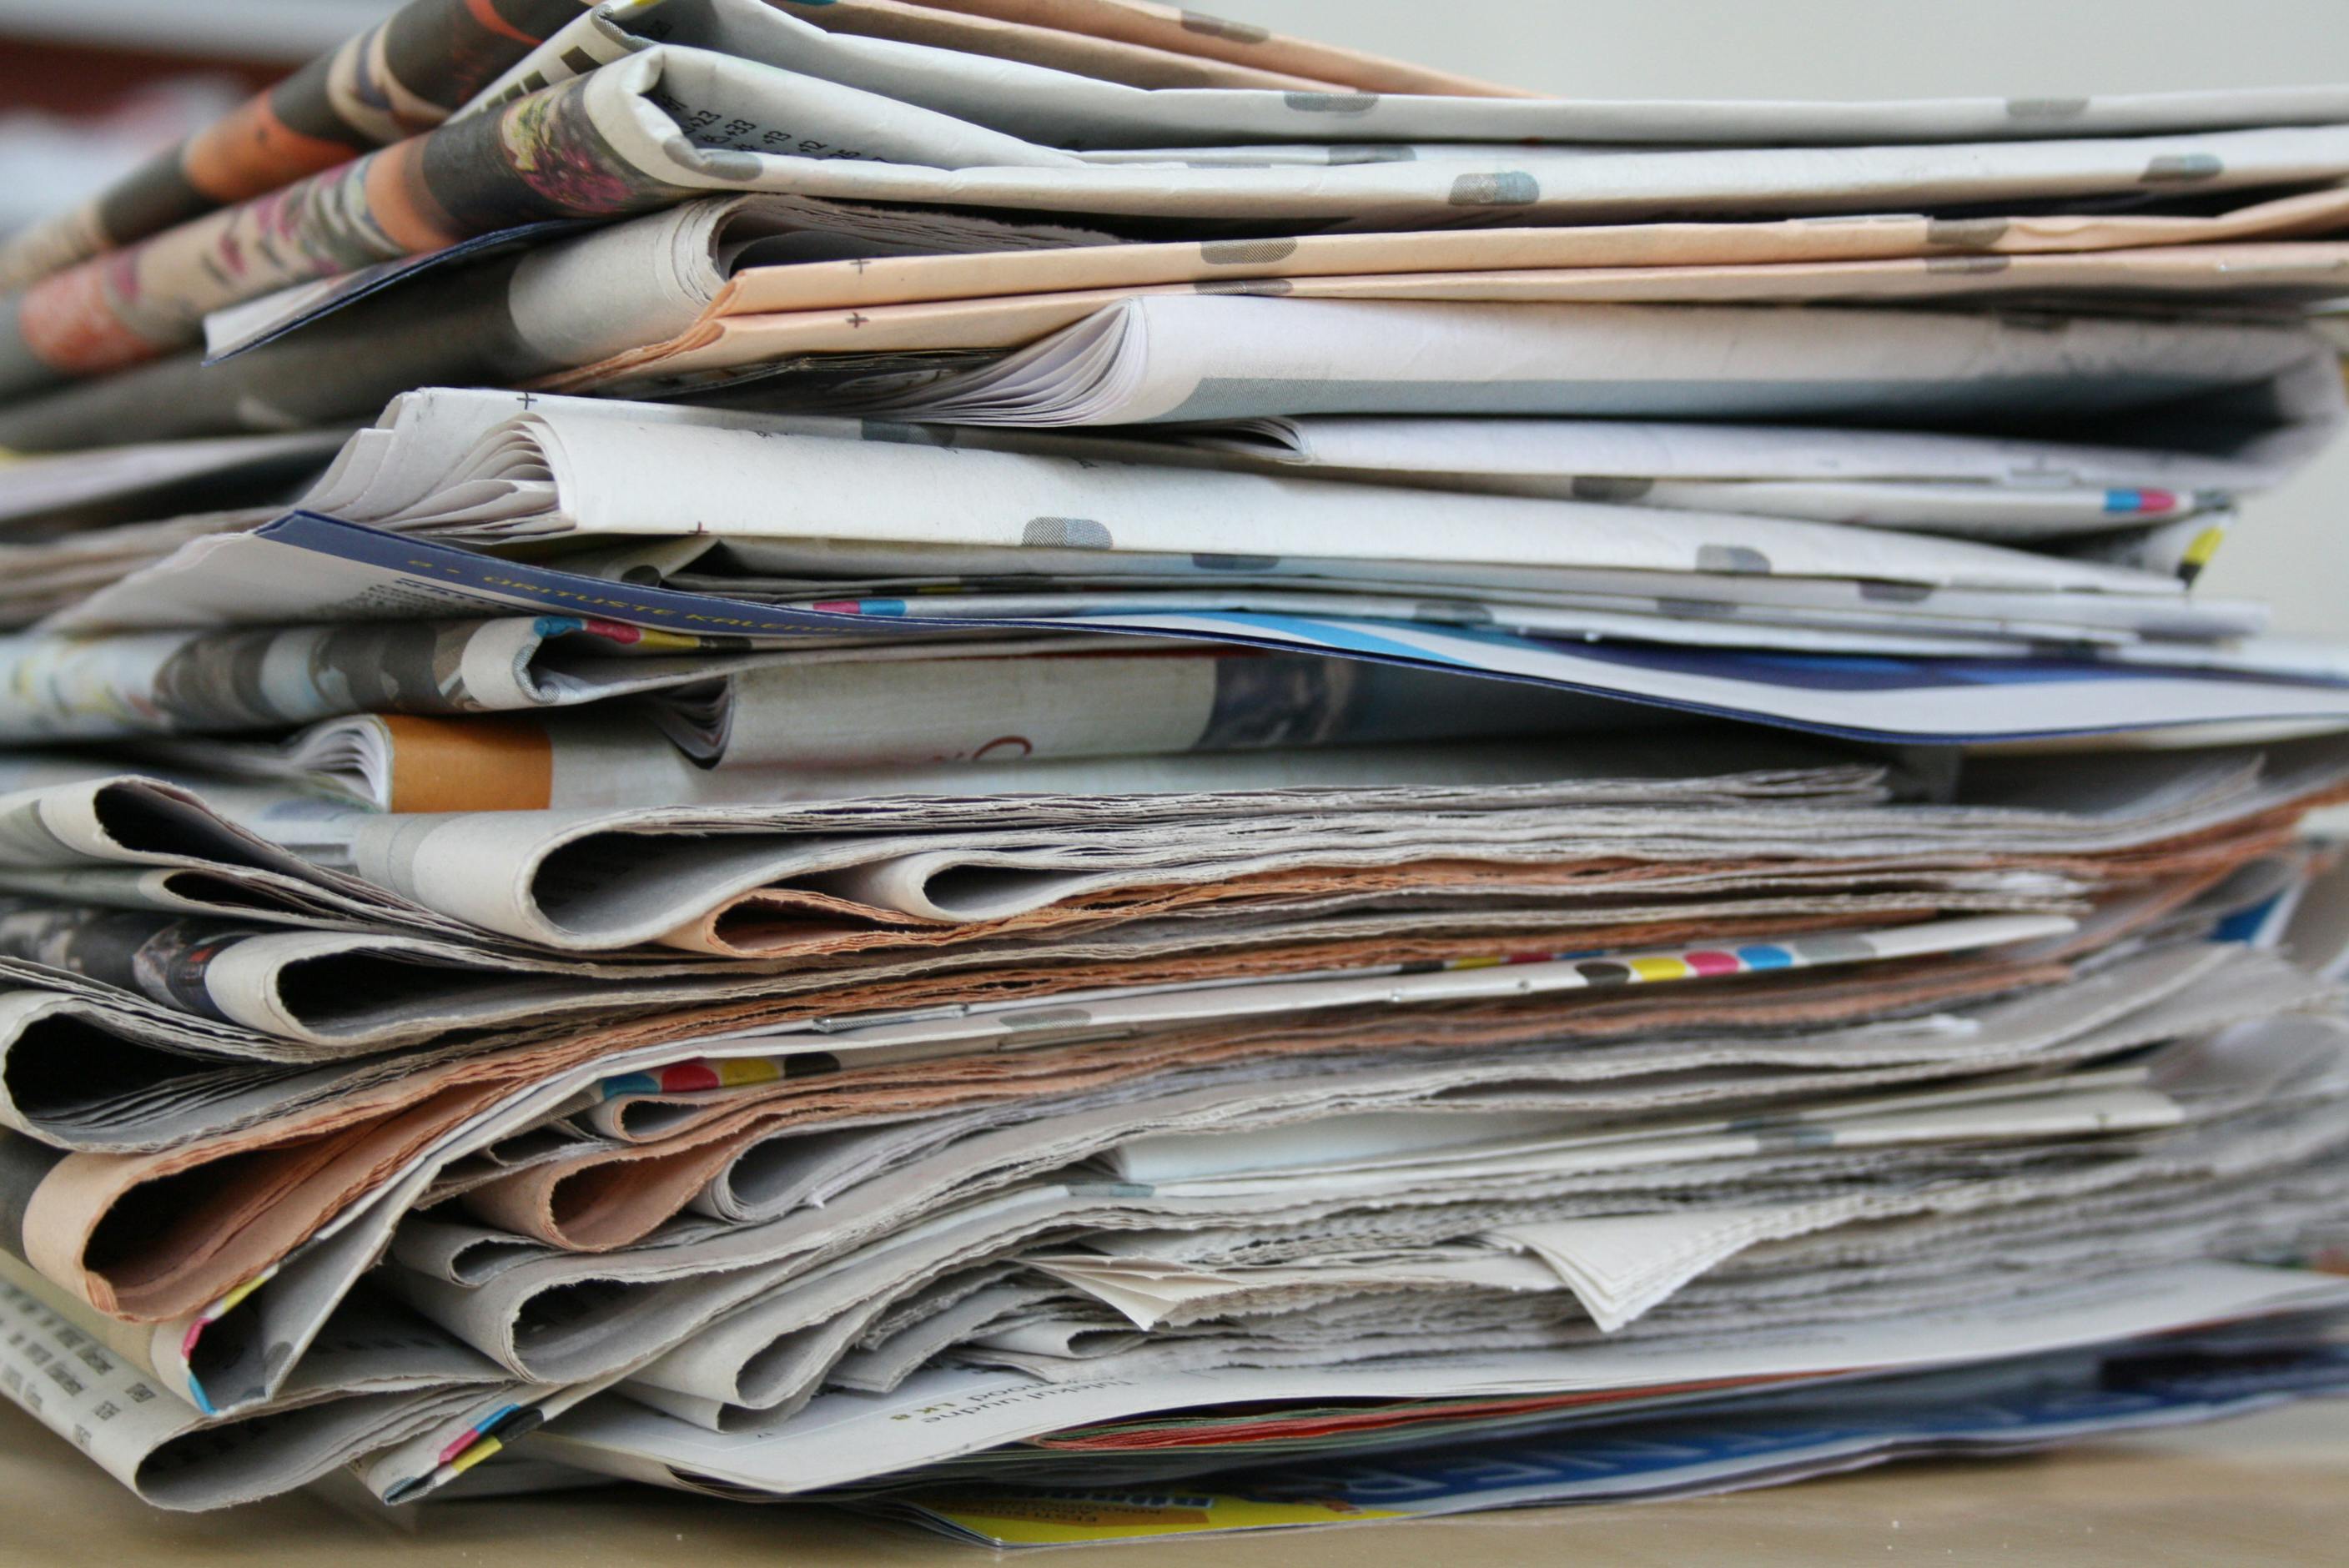 Free stock photo of newspaper, newspaper pile, old newspapers